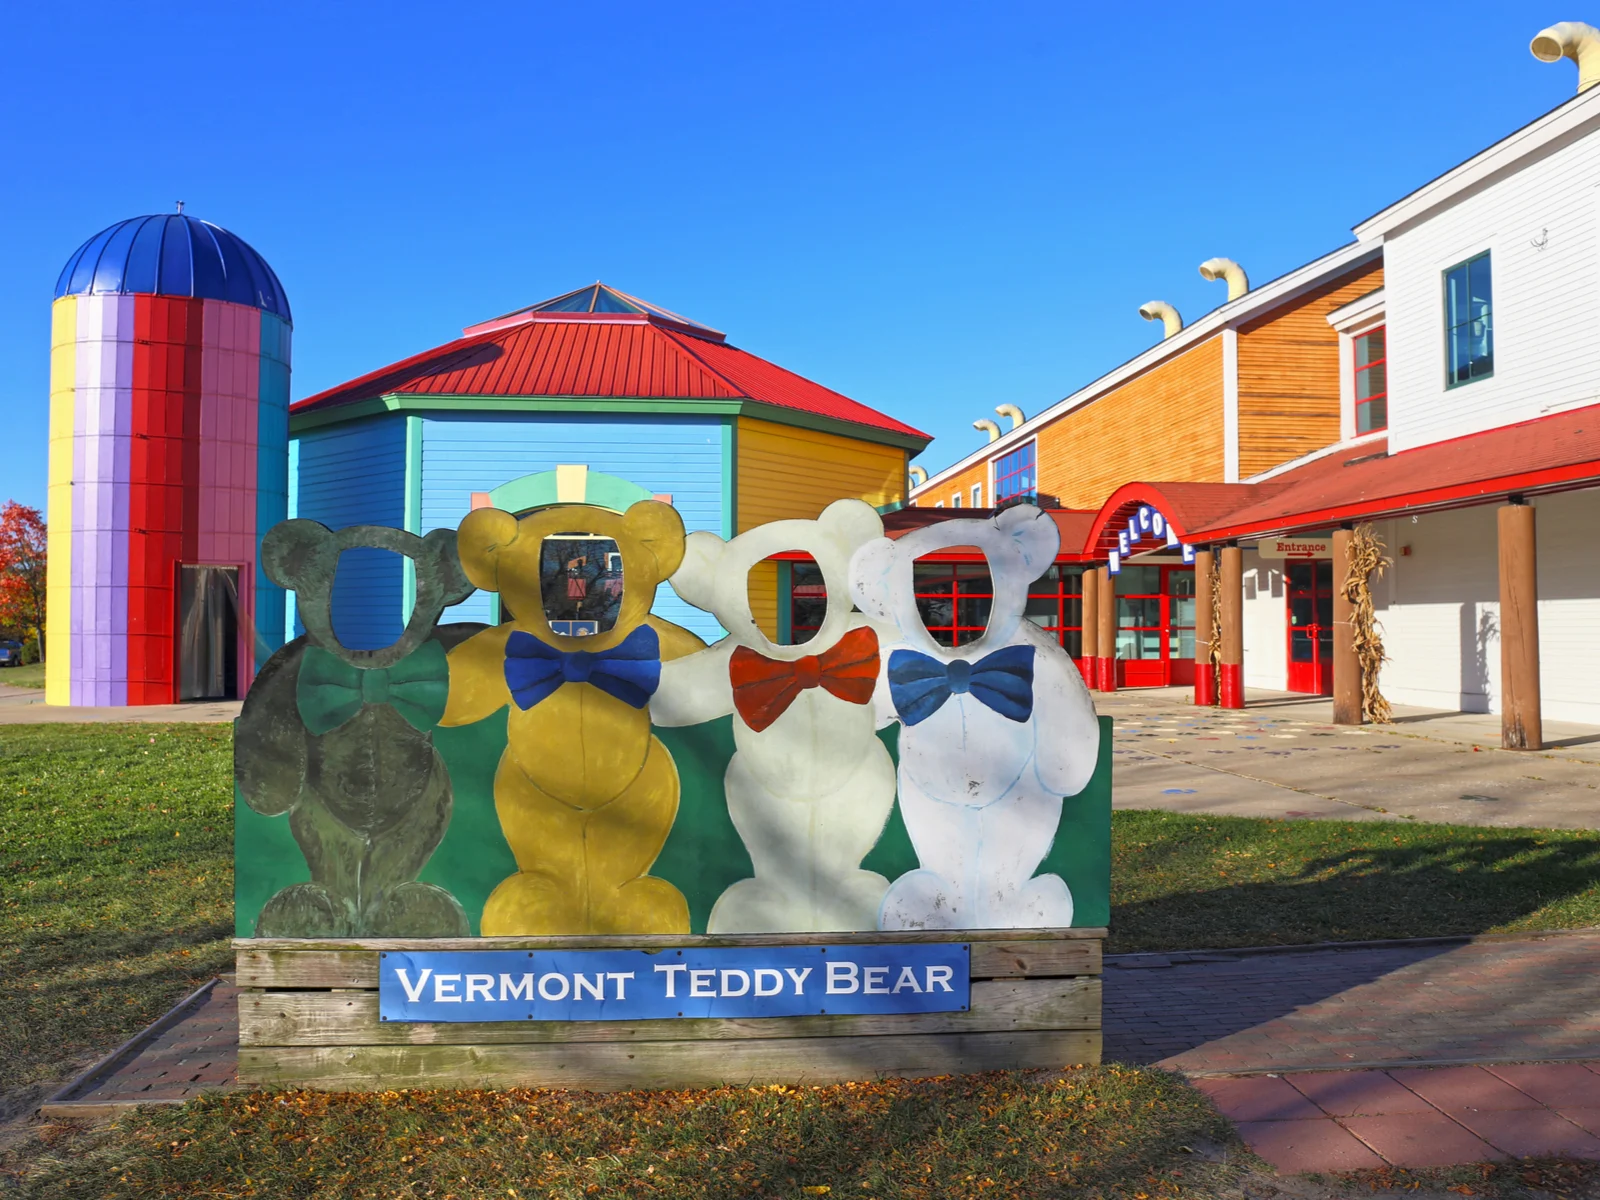 Vermont teddy bear factory, one of the best things to do in Vermont